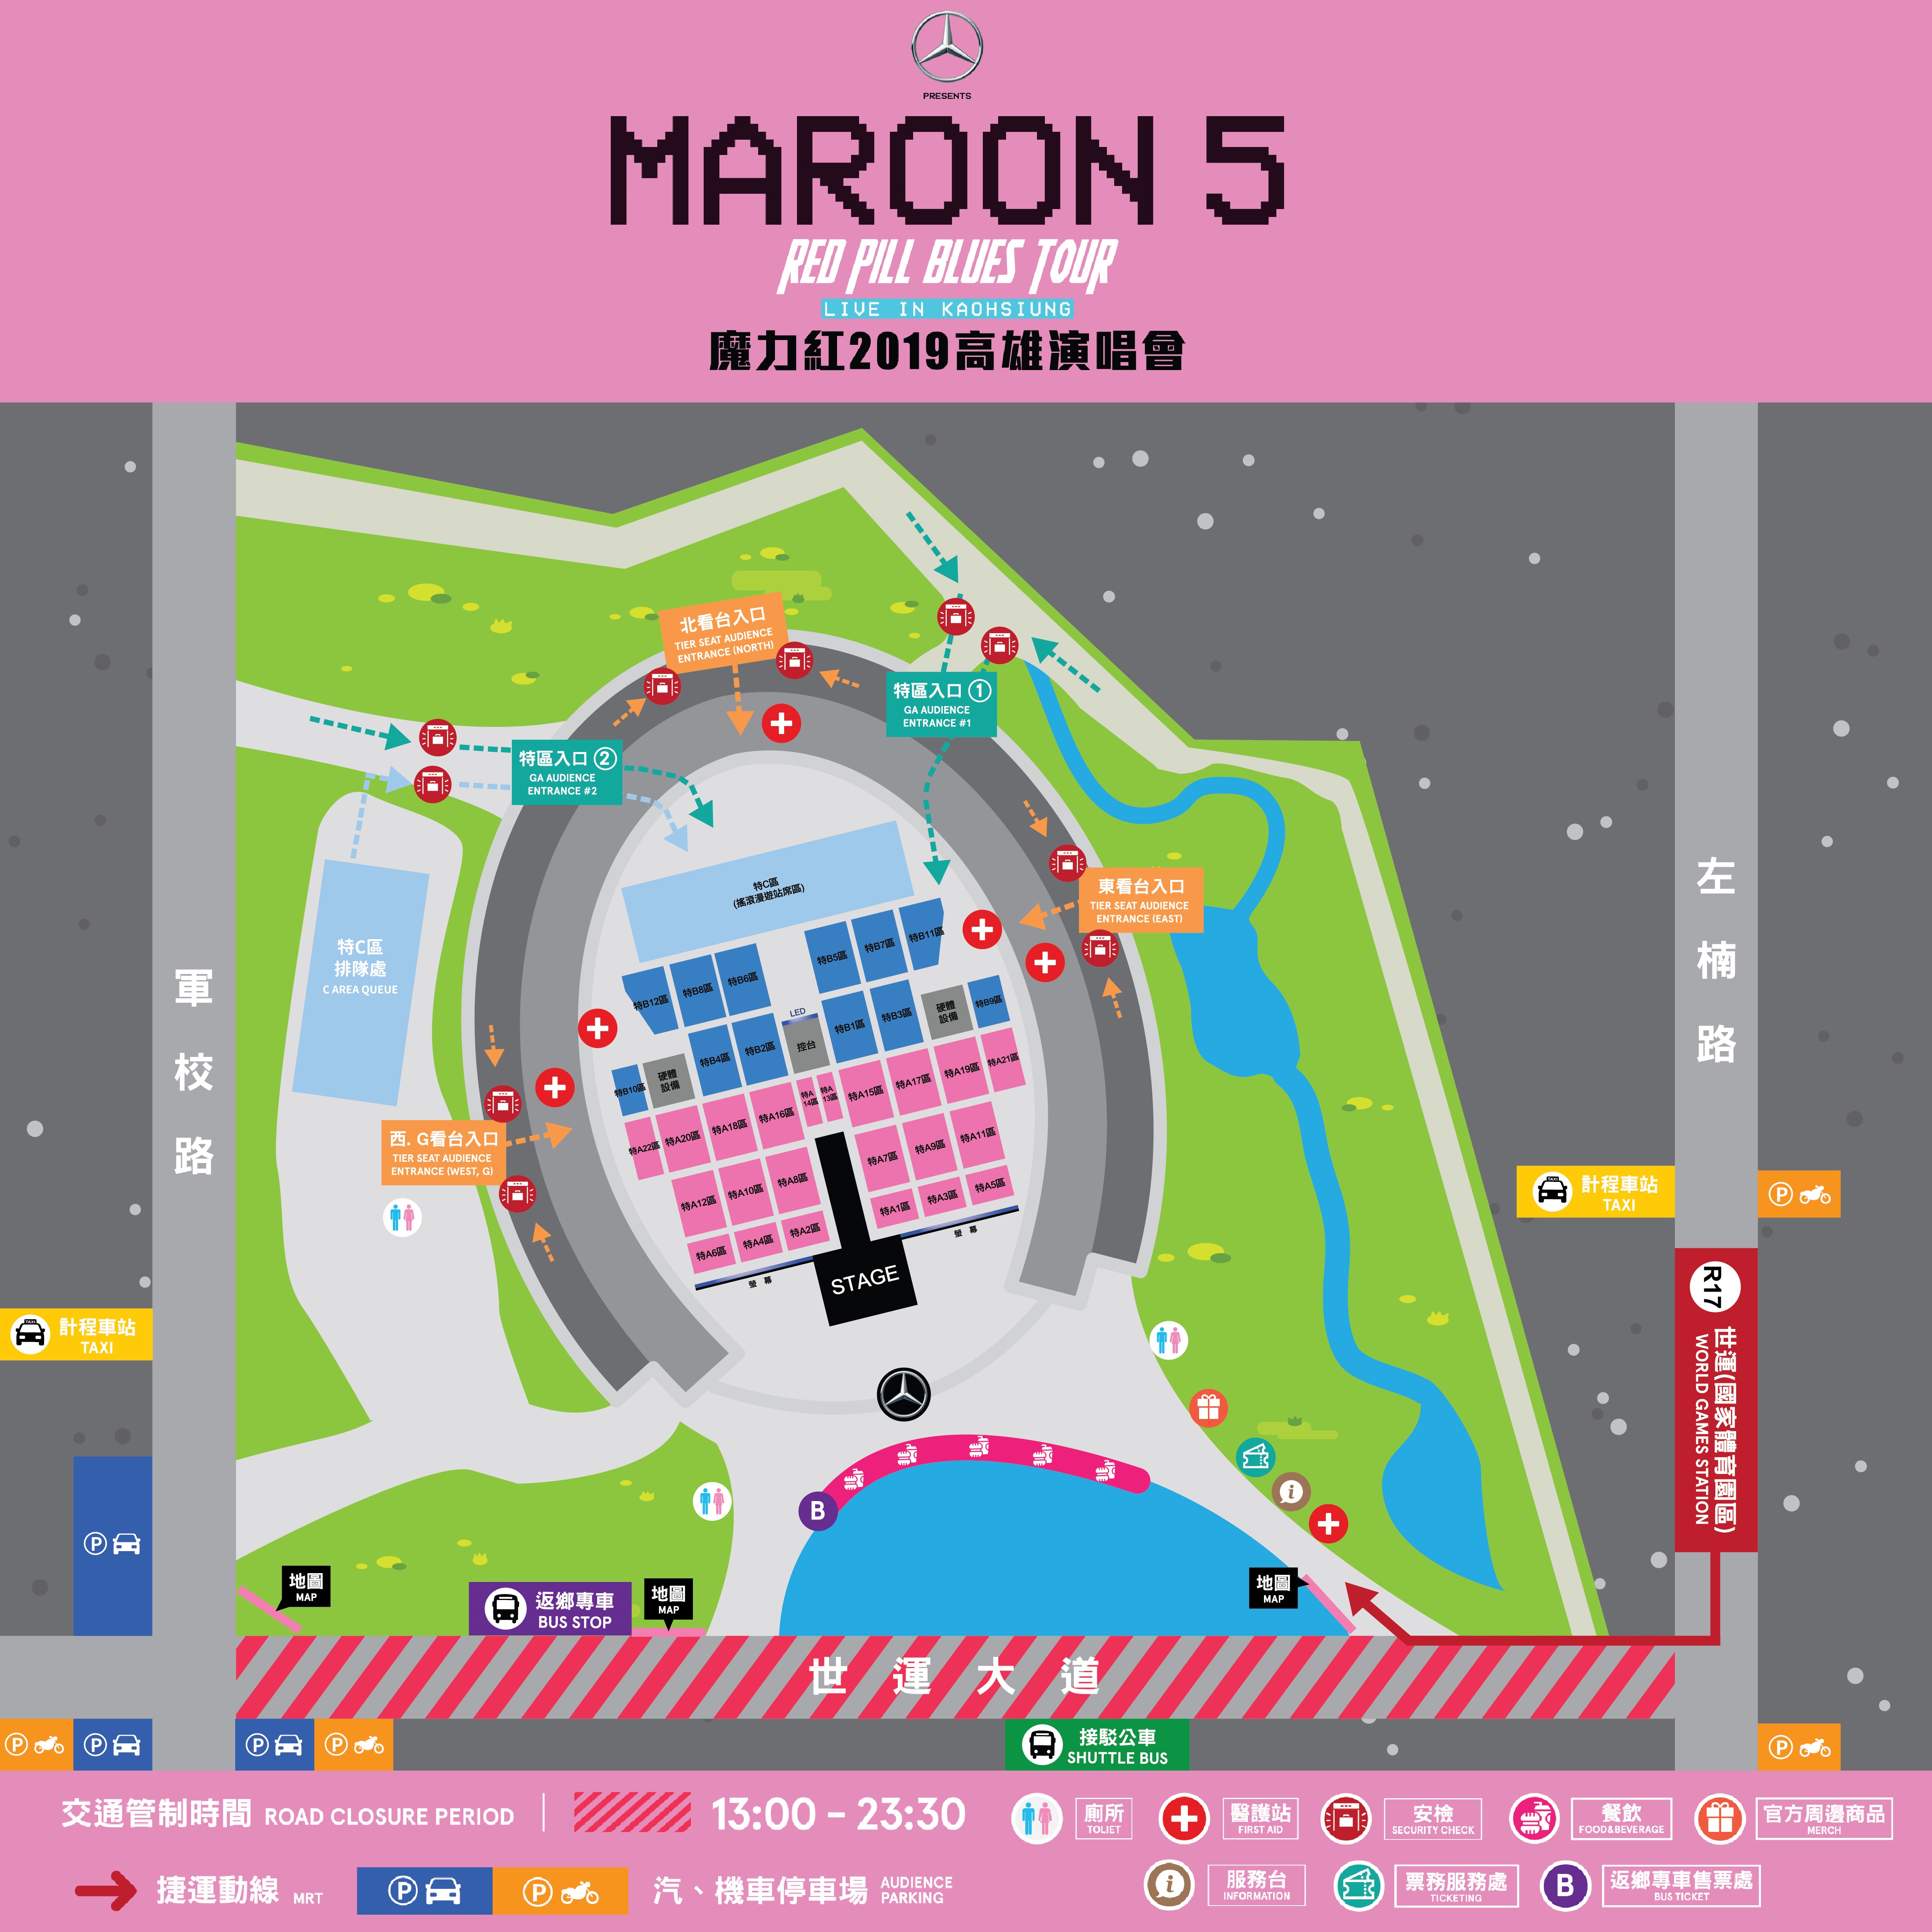 MAROON 5 RED PILL BLUES TOUR LIVE IN KAOHSIUNG 魔力紅2019高雄演唱會 - 入場辦法Entry Notice